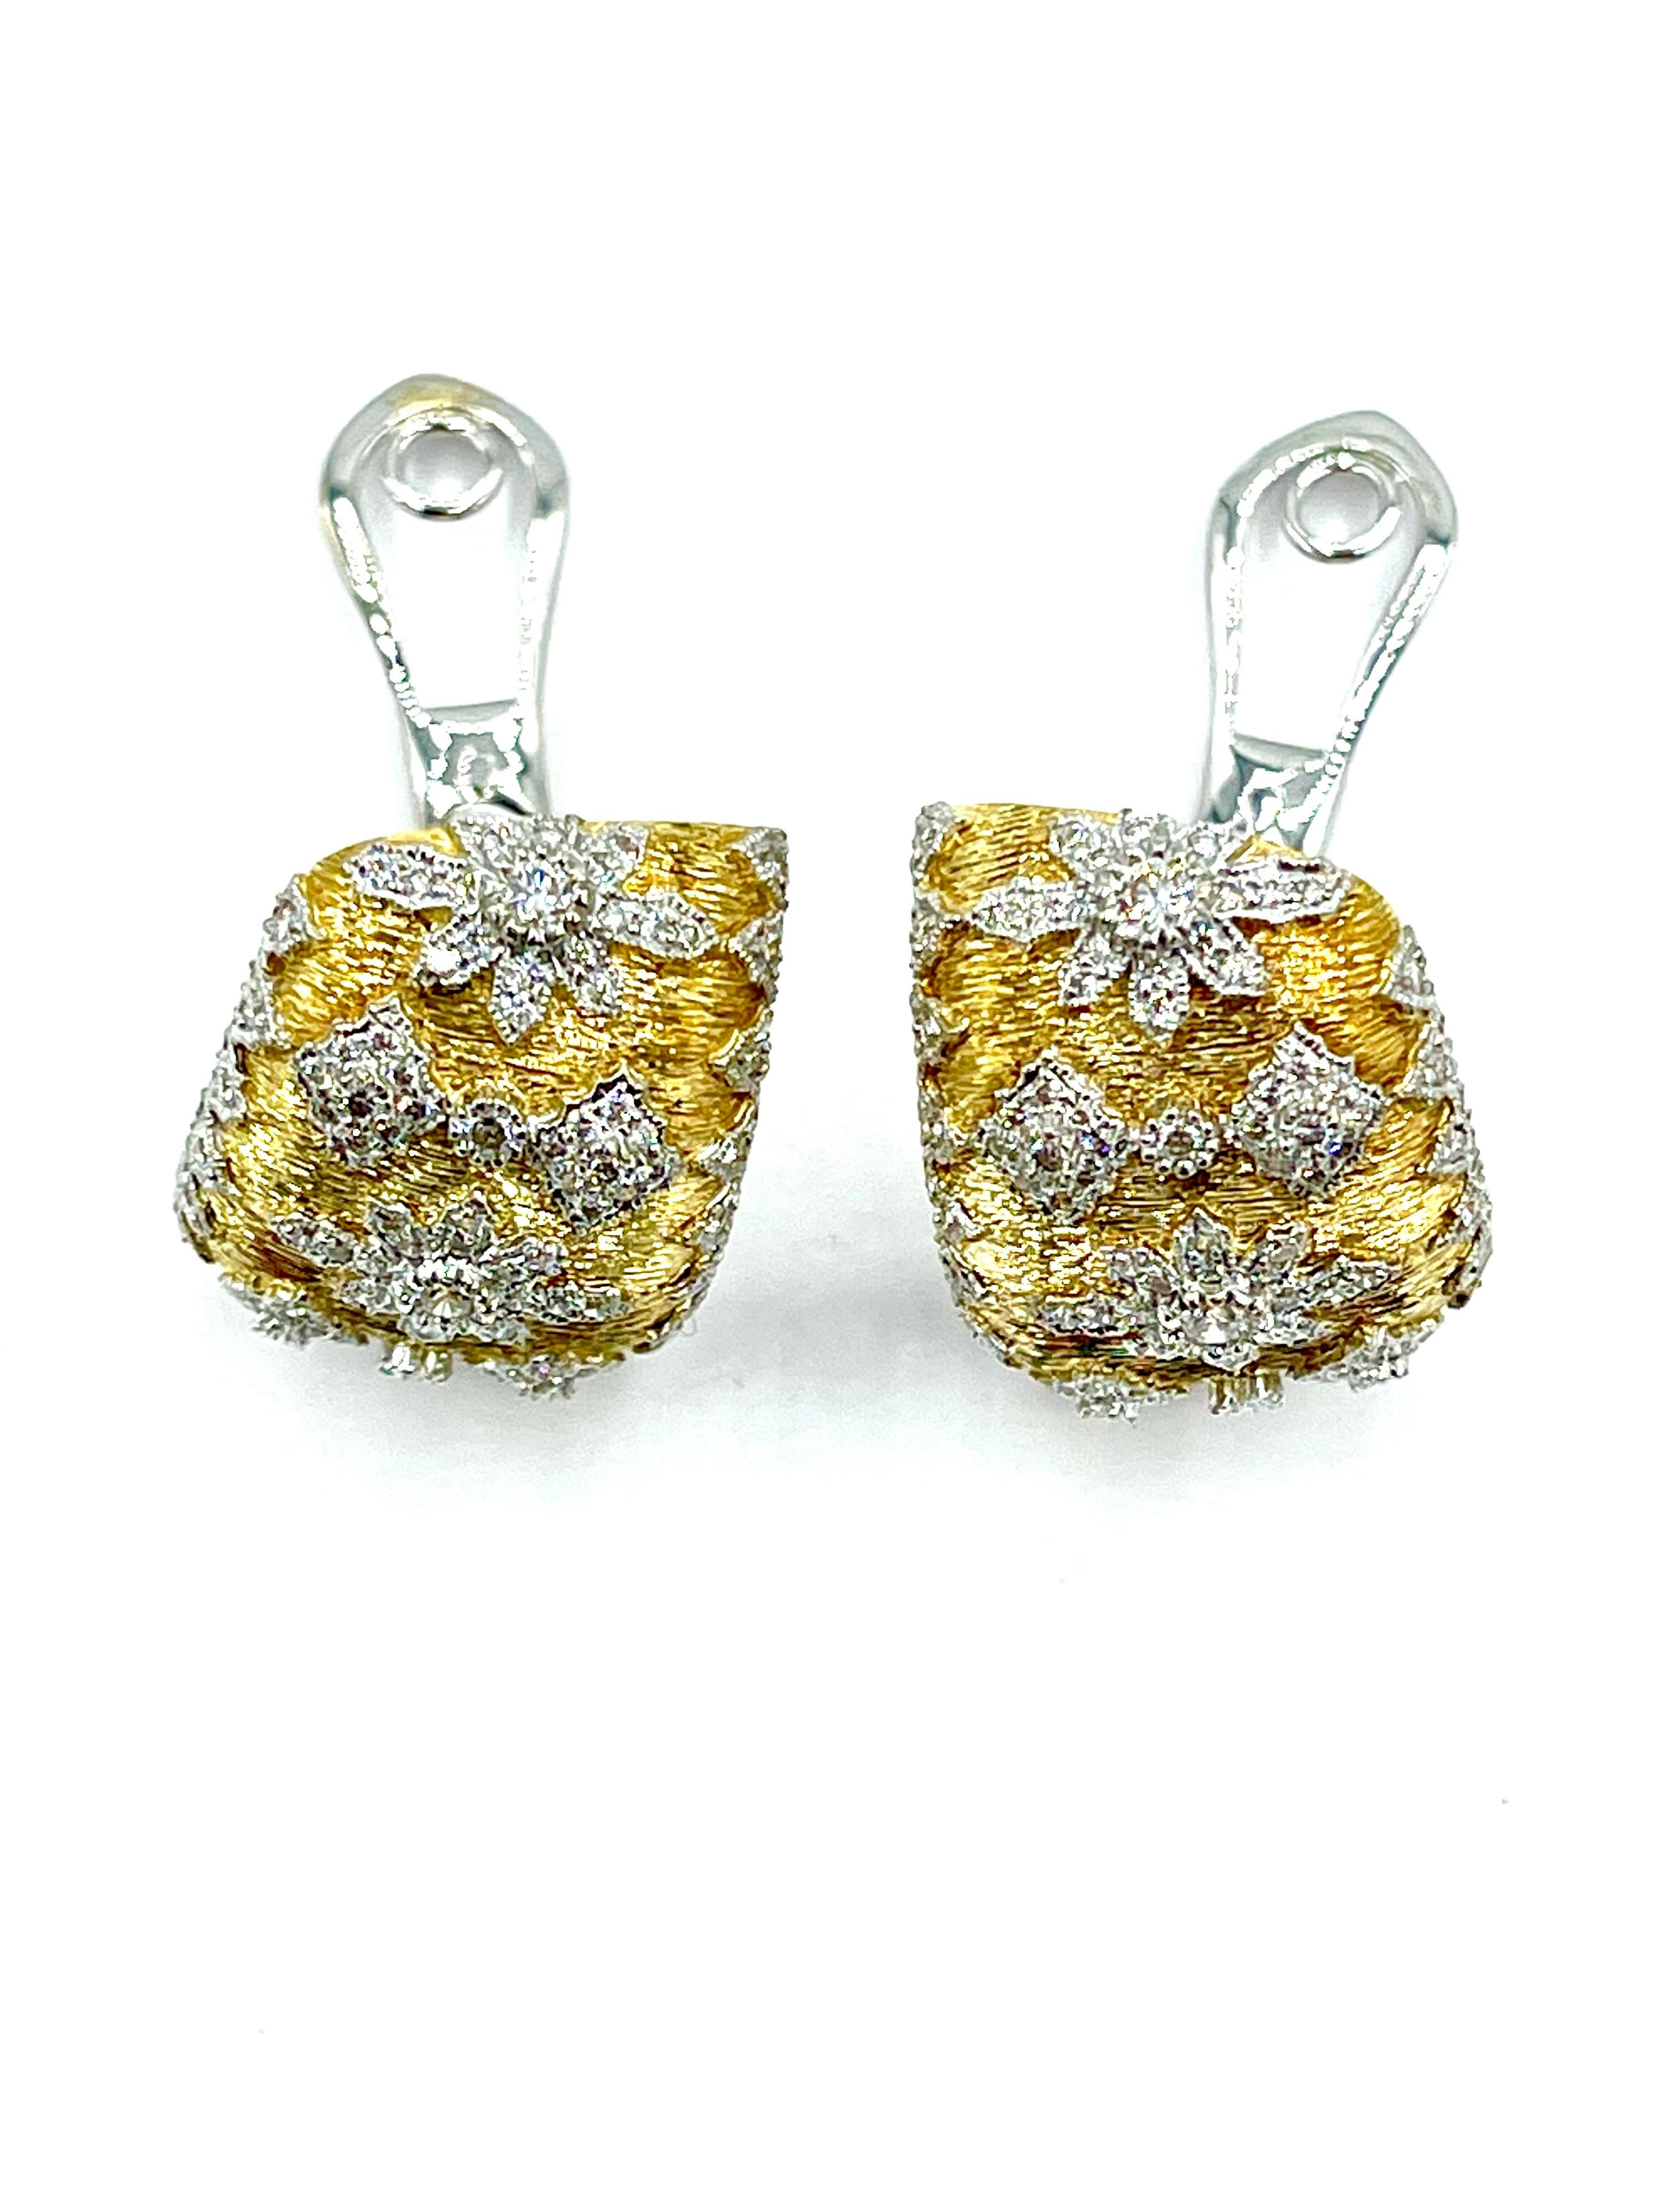 Revival 1.71 Carat Diamond and 18 Karat White and Yellow Gold Clip and Post Earrings